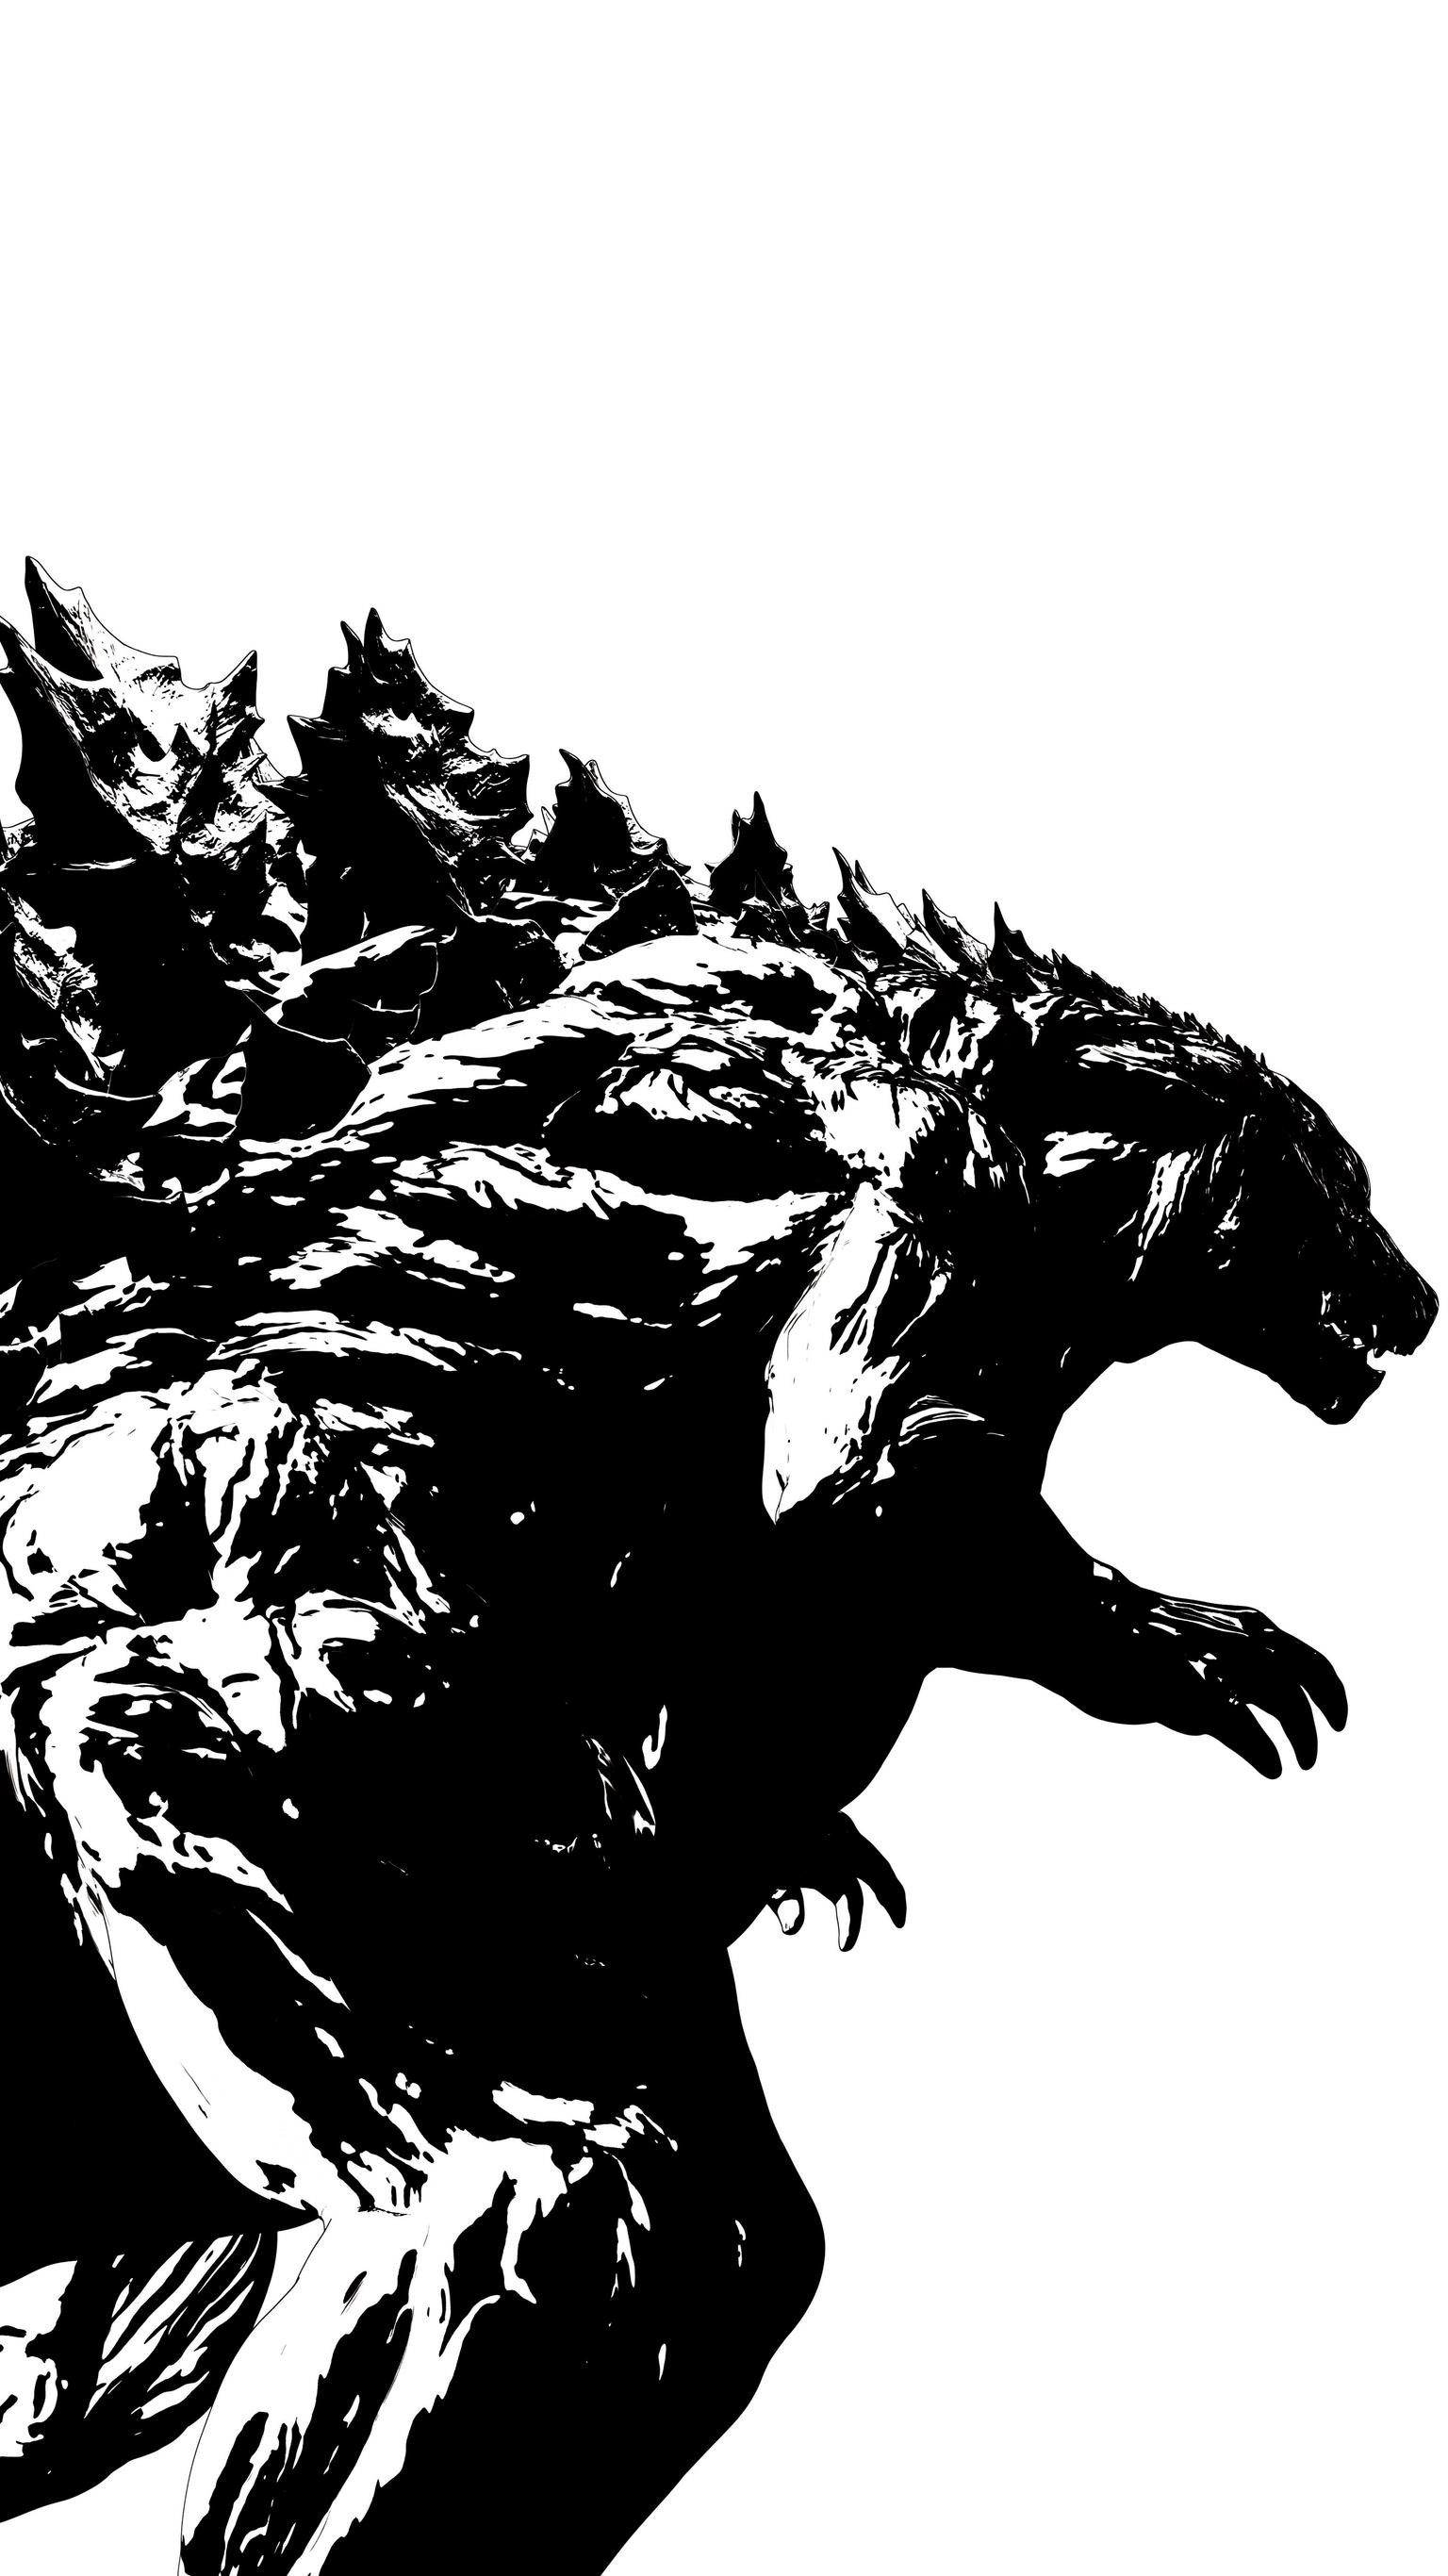 godzilla iphone wallpaper,werewolf,fictional character,mythical creature,illustration,grizzly bear